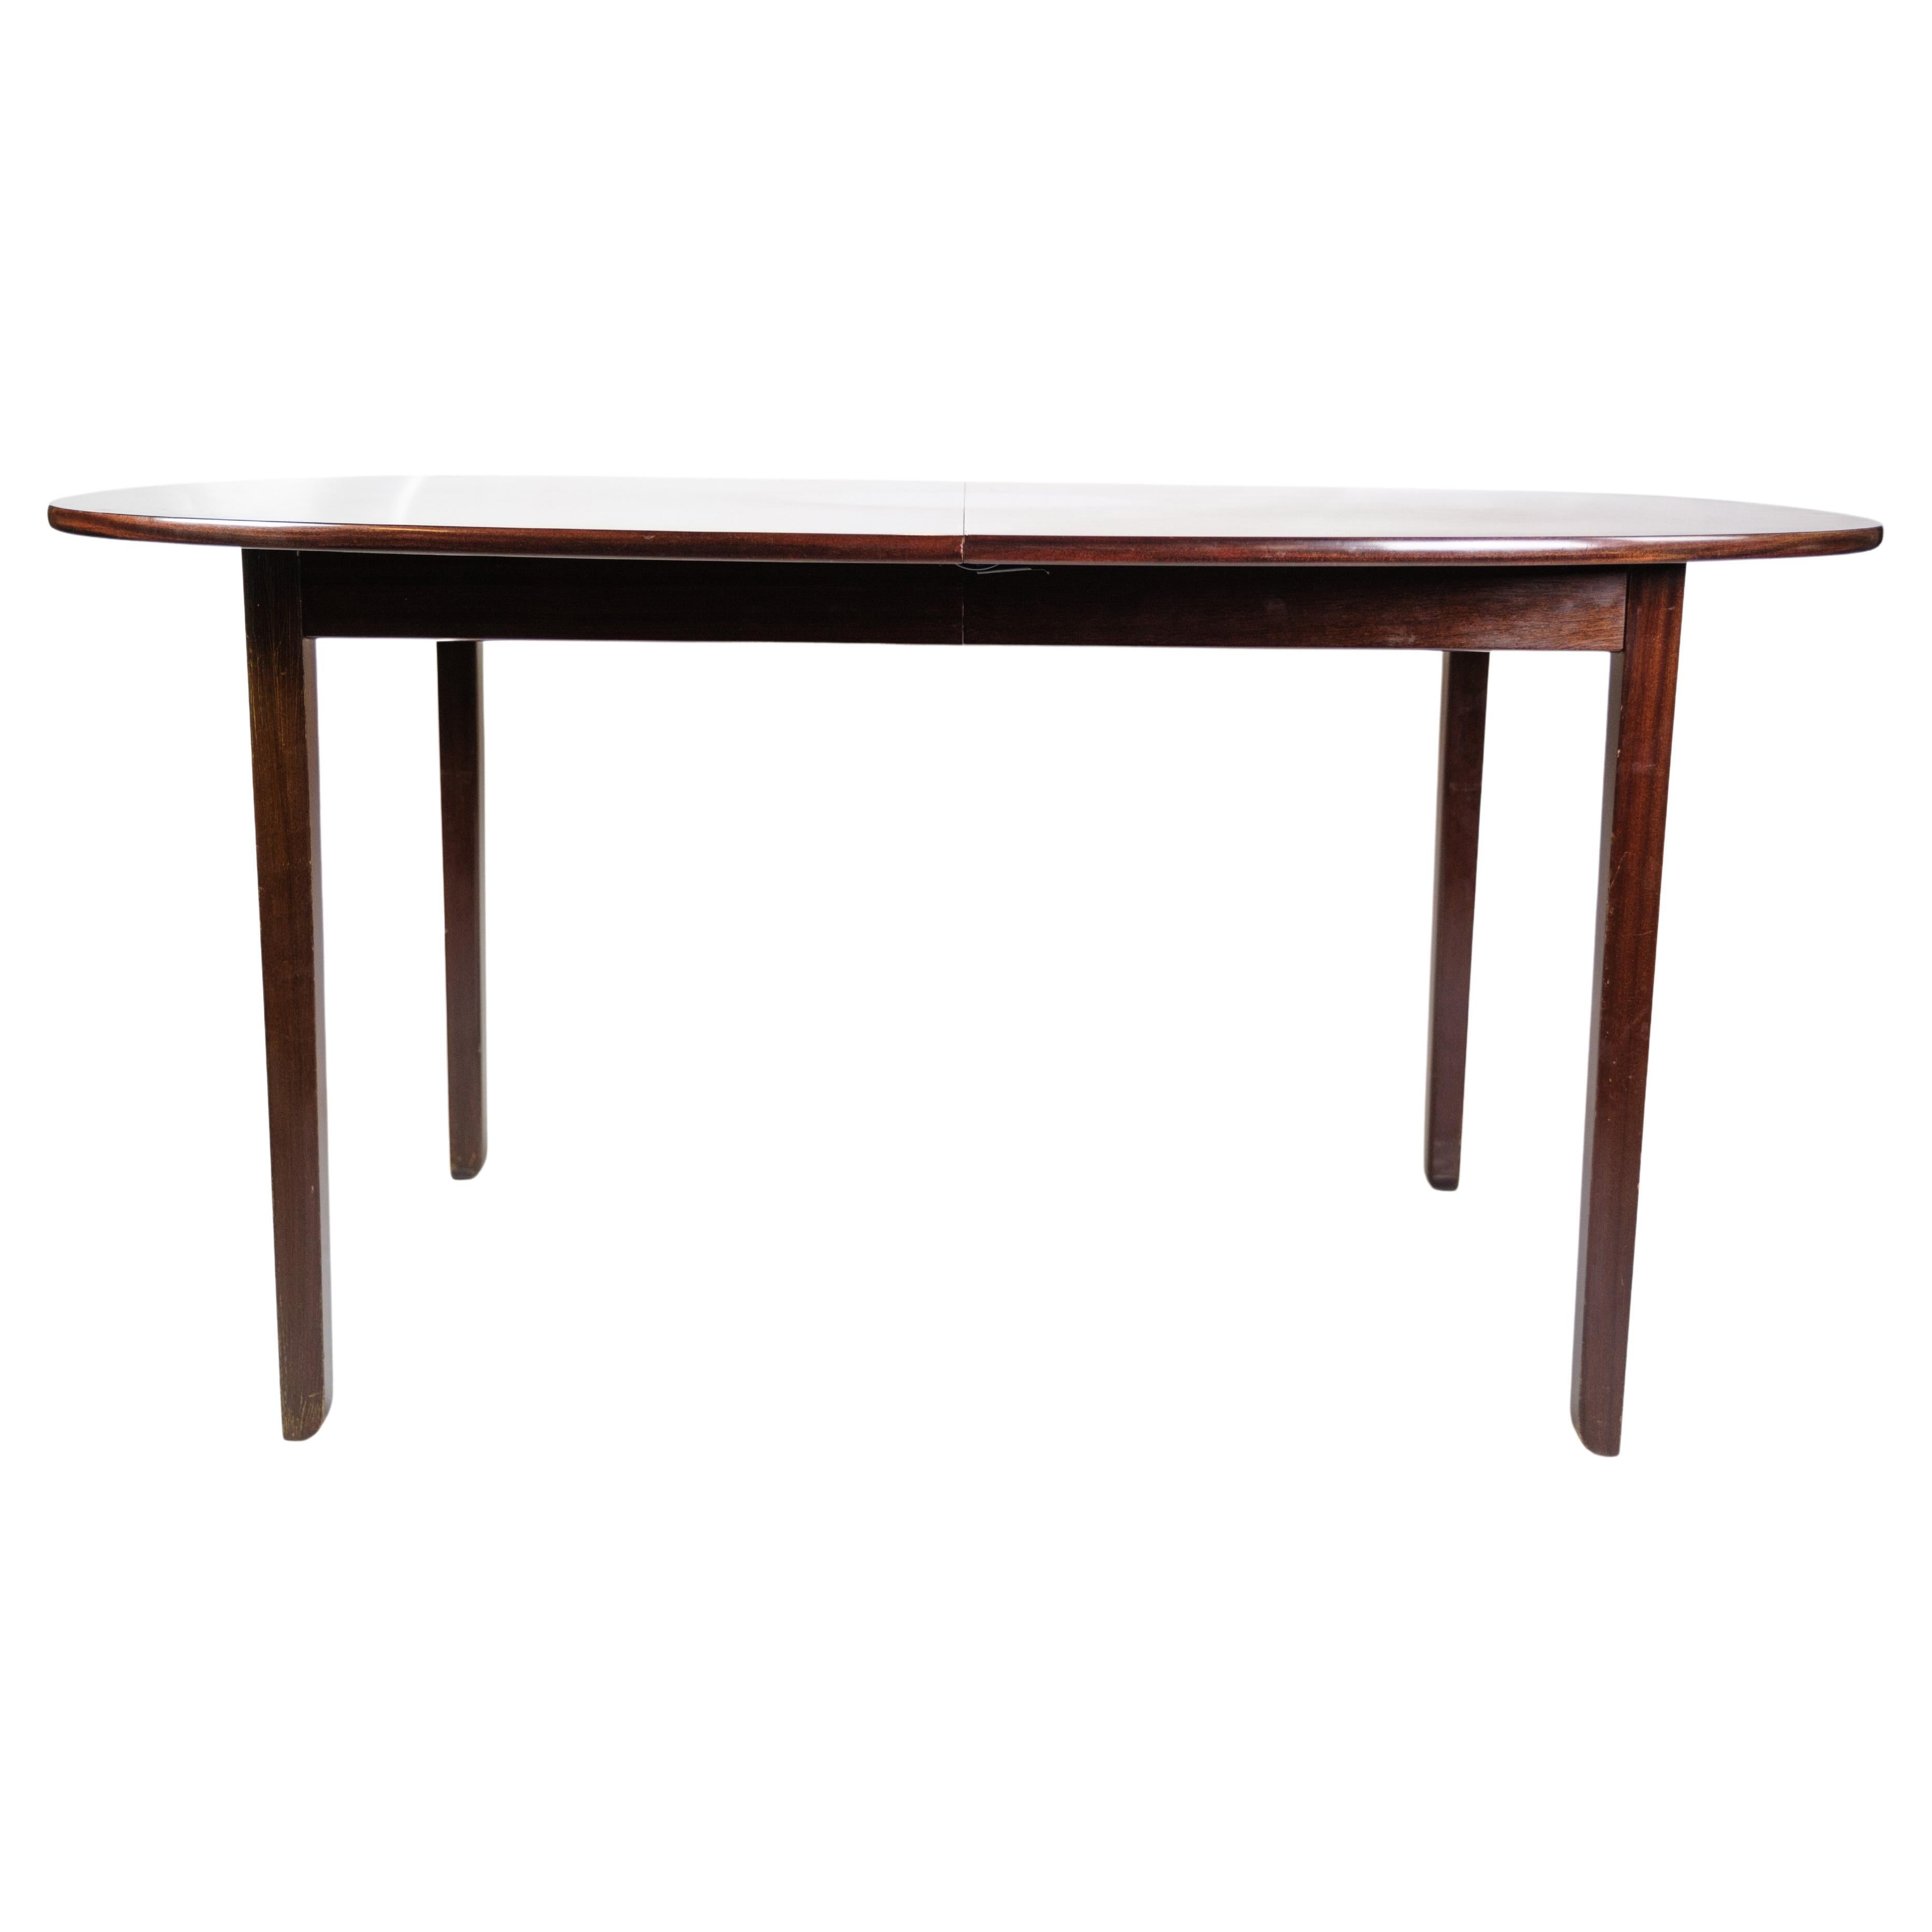 Dining Room Table Made In Mahogany By Ole Wanscher From 1960s For Sale